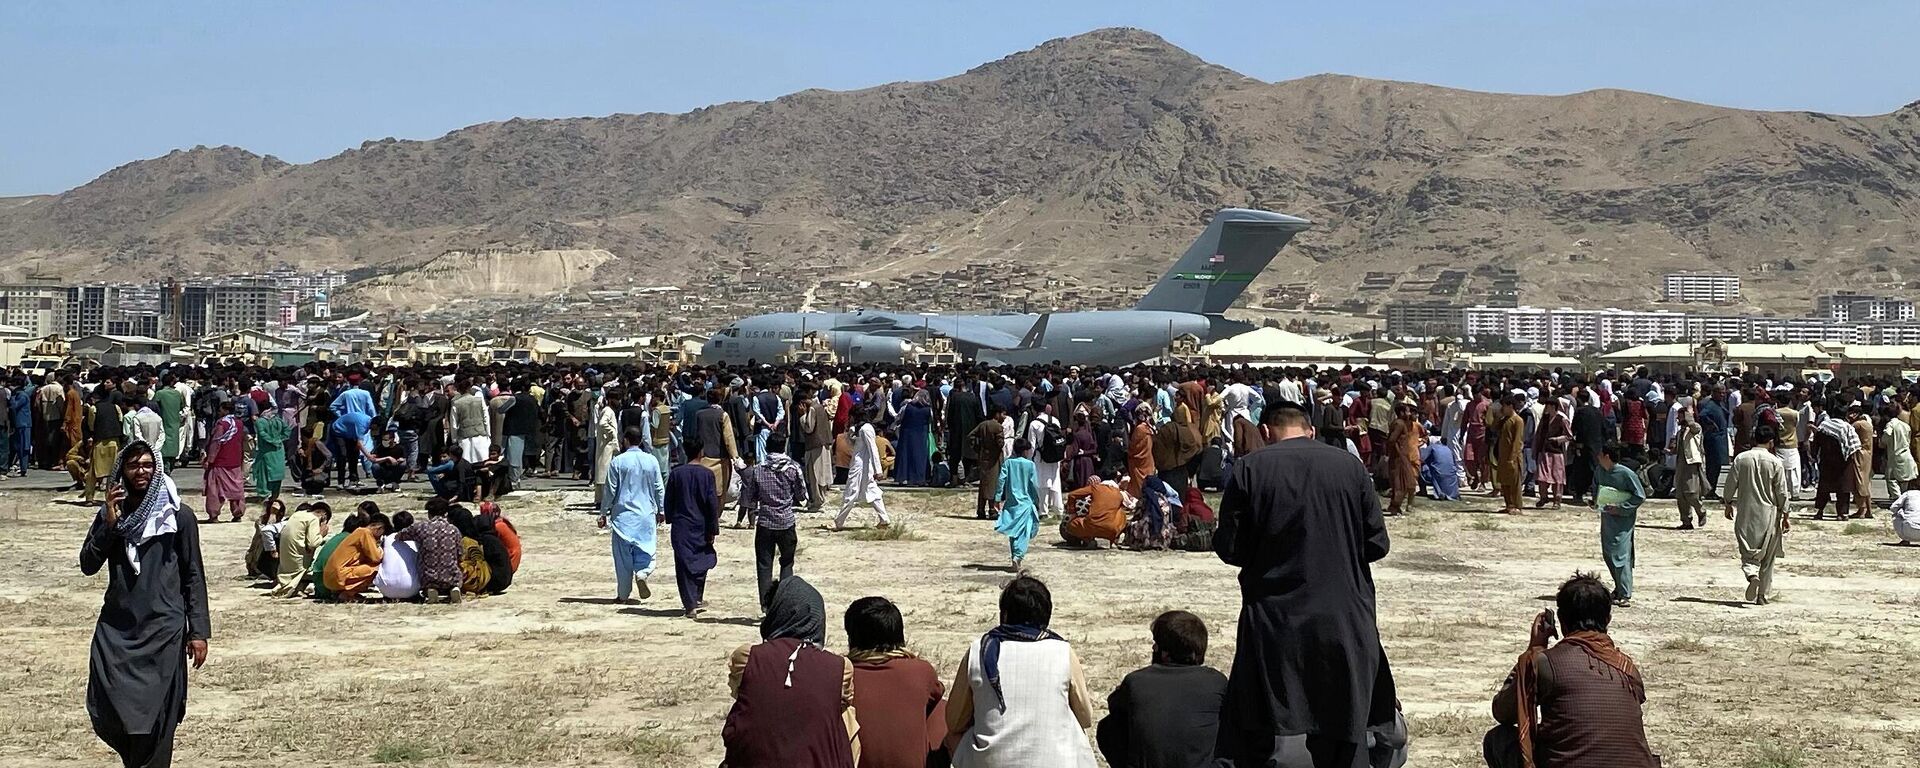  In this Aug. 16, 2021, file photo, hundreds of people gather near a U.S. Air Force C-17 transport plane at the perimeter of the international airport in Kabul, Afghanistan. Ordinary Americans and the nation's airlines are combining to donate miles and cash to help Afghan refugees resettle in the United States. Organizers said Tuesday, Oct. 26, they have raised enough donations pay for 40,000 flights, but they're hoping to nearly double that amount.  - Sputnik International, 1920, 21.06.2023